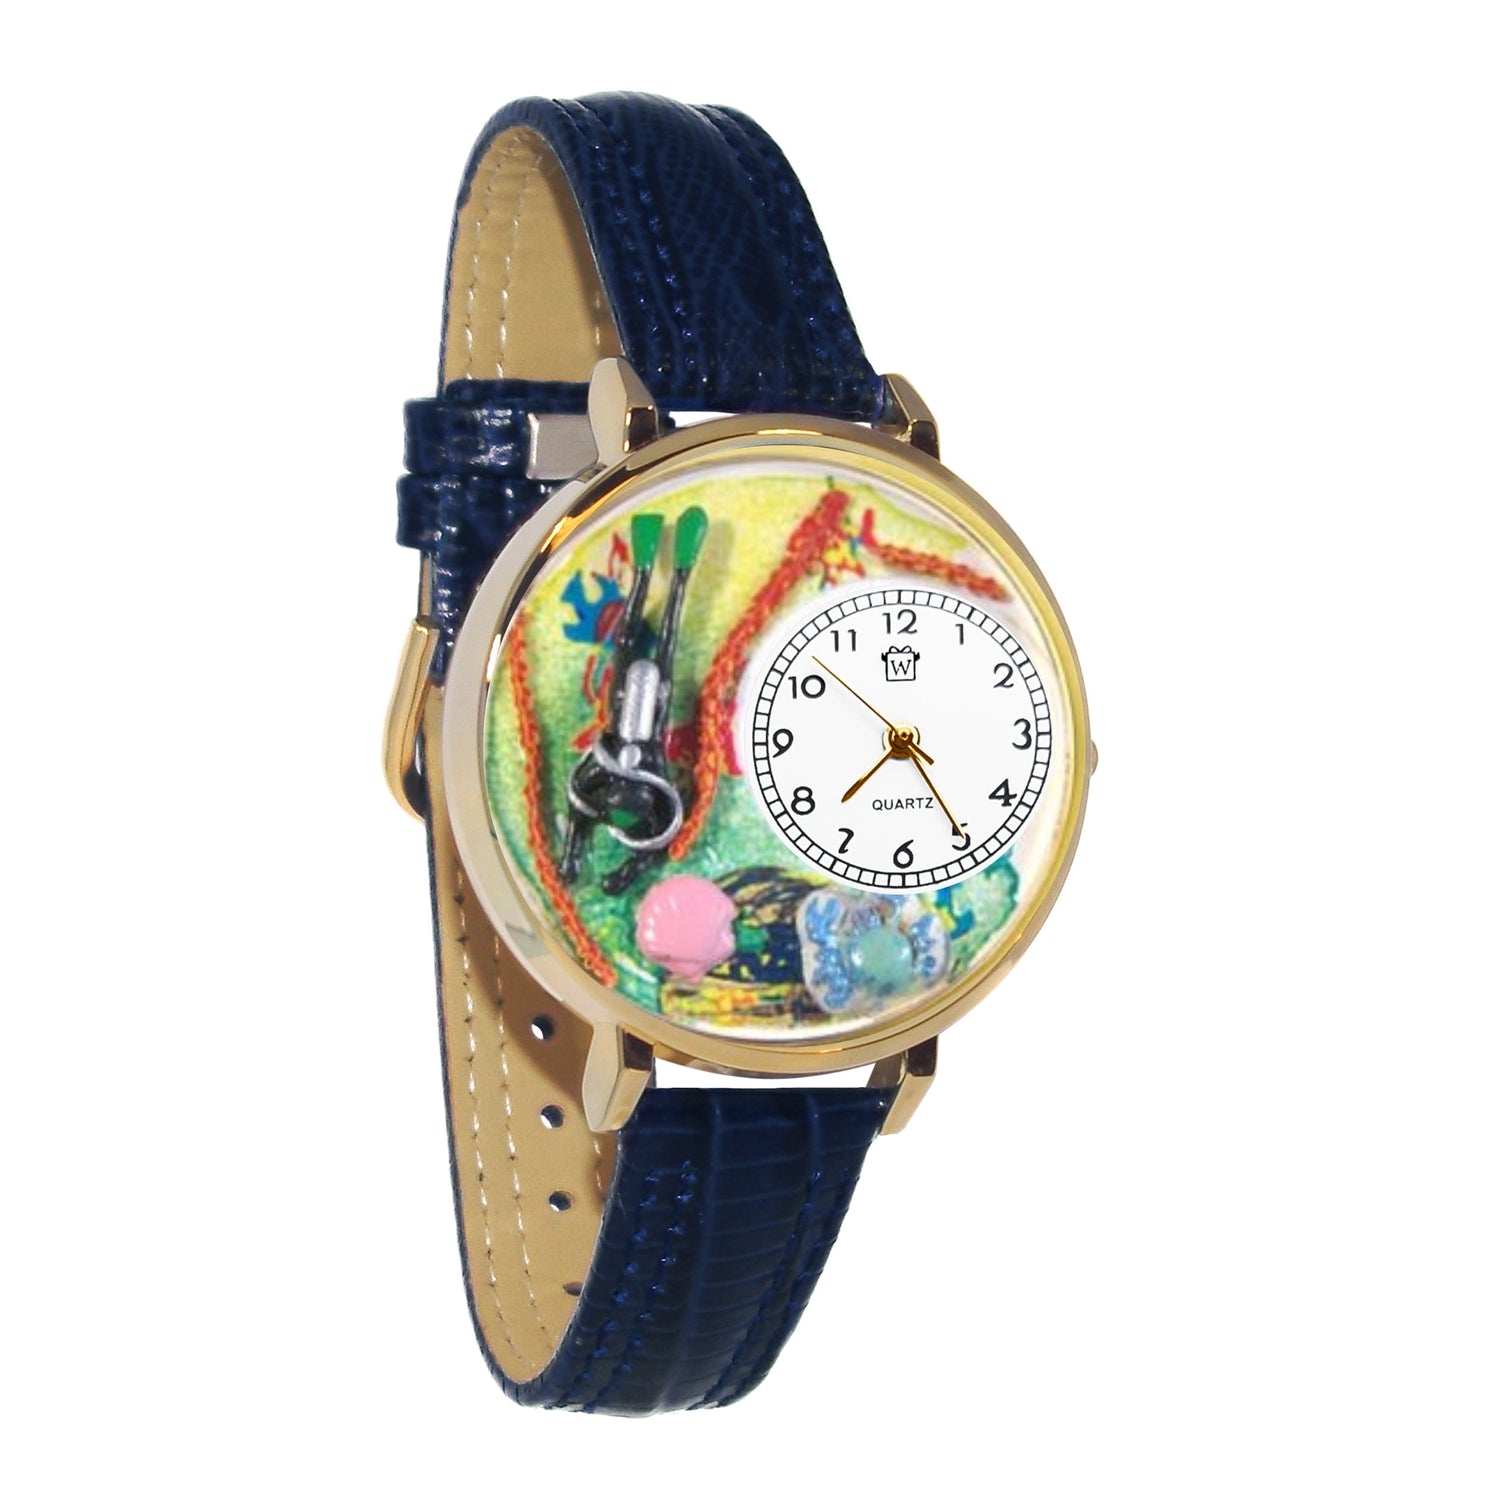 Whimsical Gifts | Scuba 3D Watch Large Style | Handmade in USA | Hobbies & Special Interests | Outdoor Hobbies | Novelty Unique Fun Miniatures Gift | Gold Finish Black Leather Watch Band